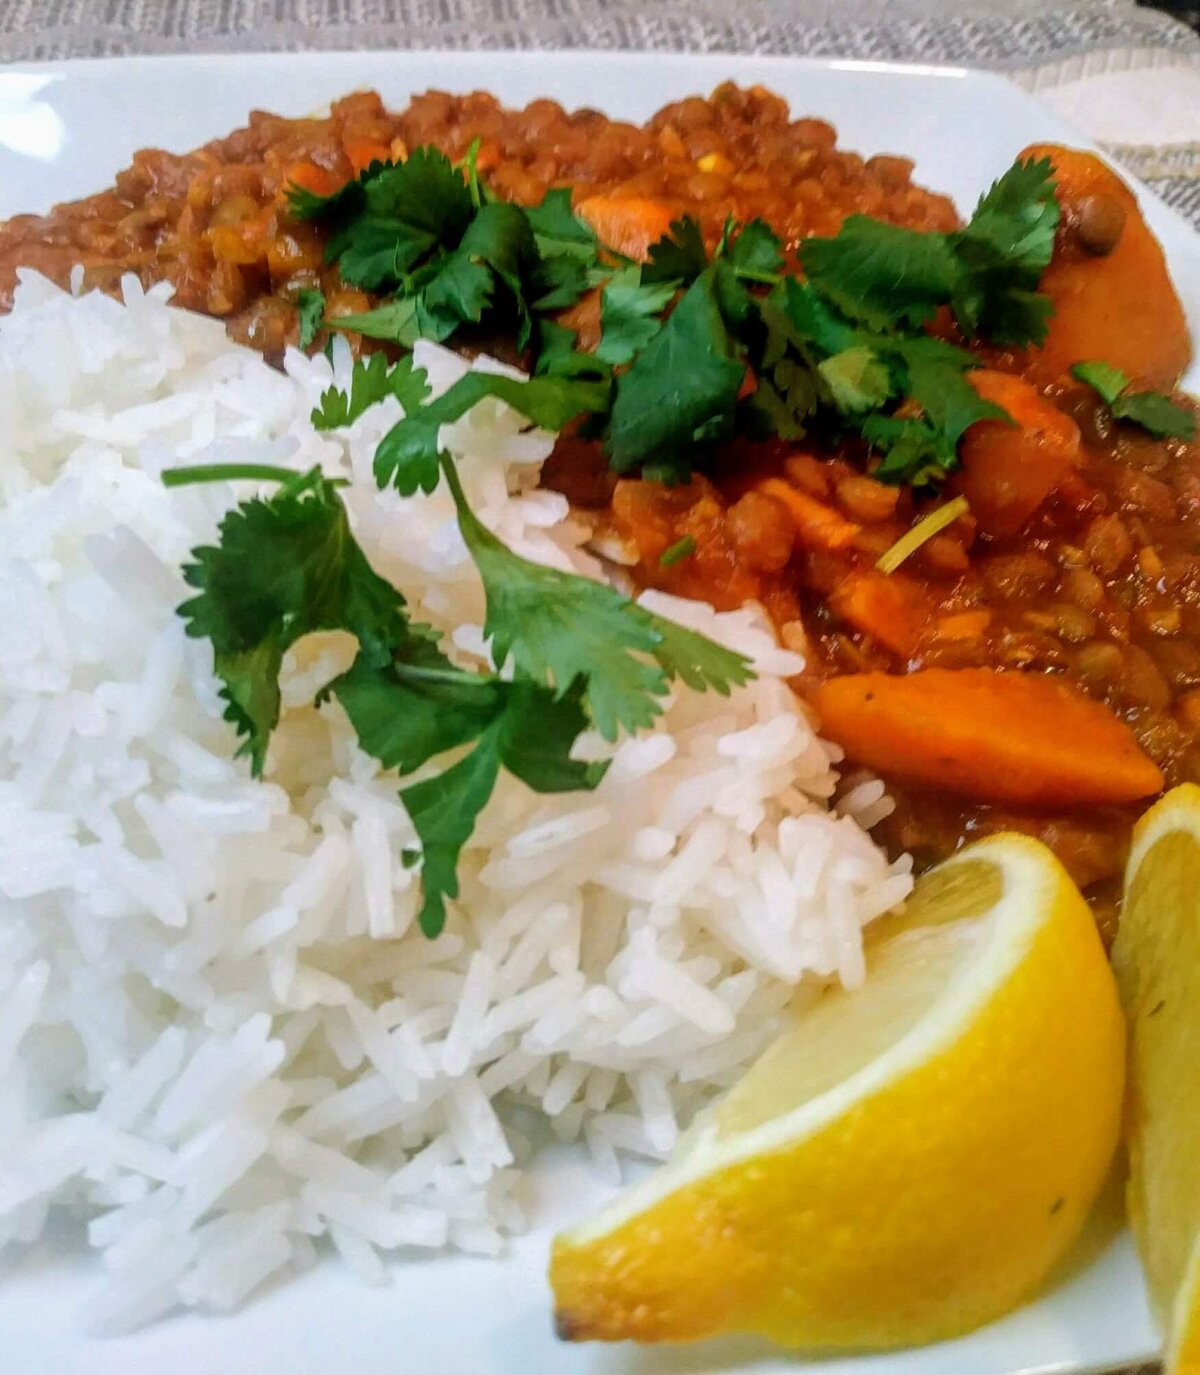 Lentil and sweet potato curry